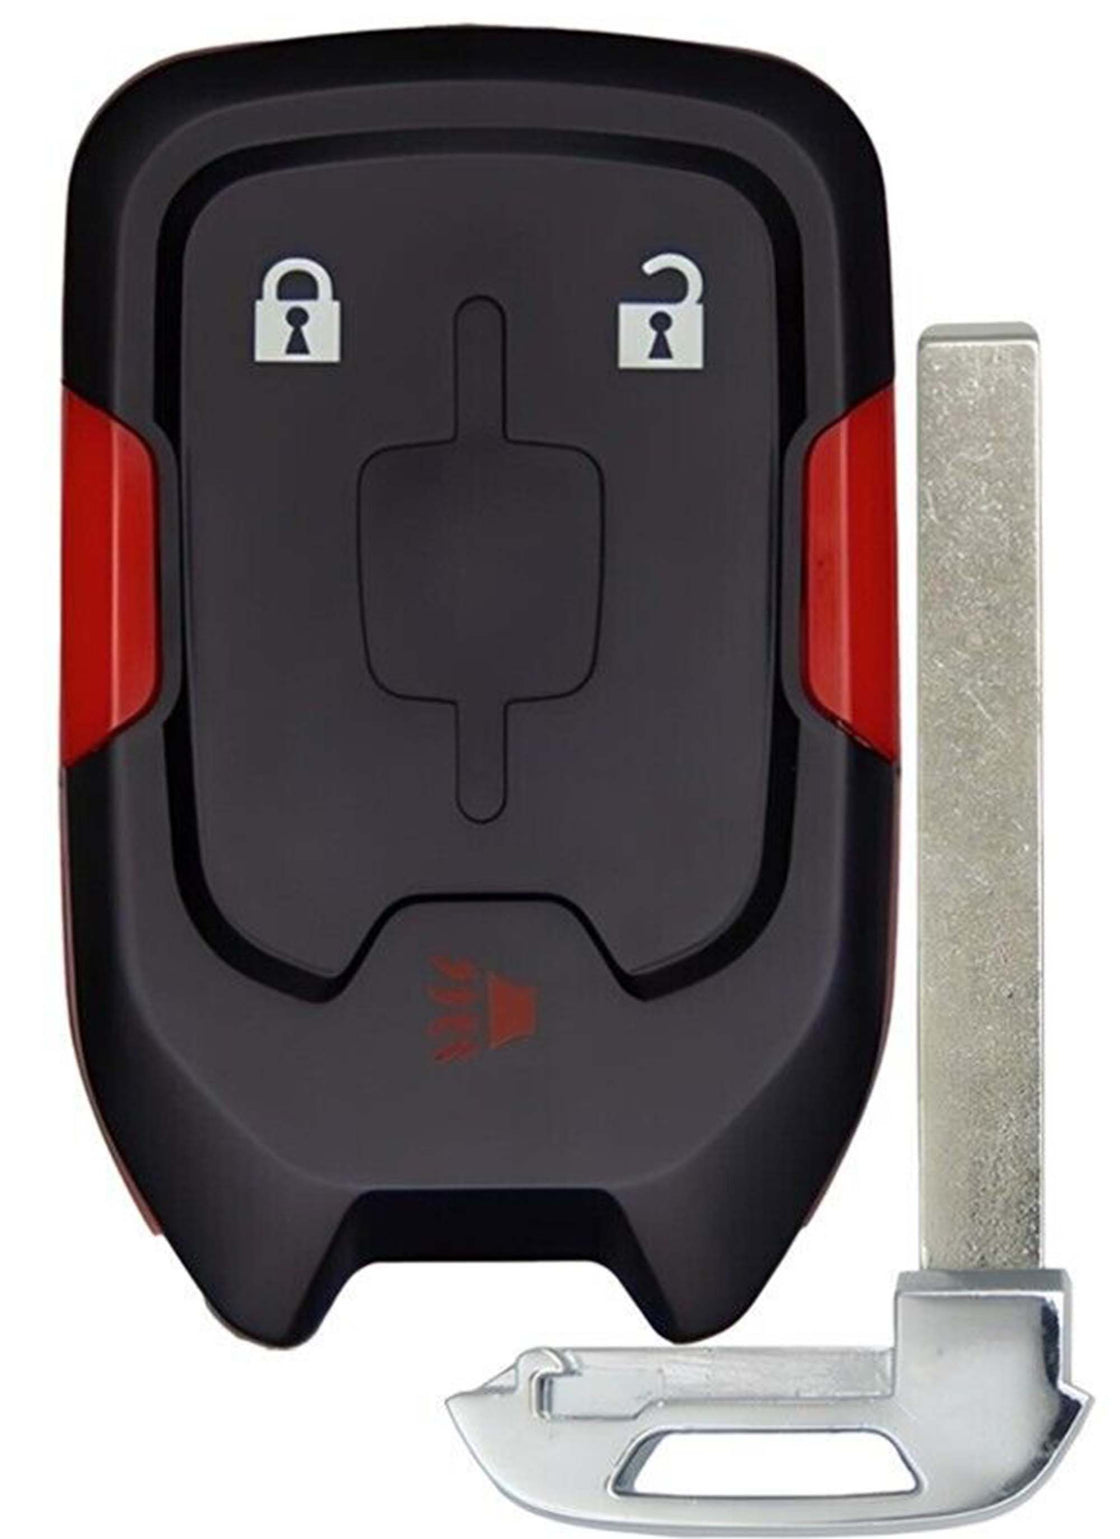 1x New Replacement Proximity Key Fob Compatible with & fit for Select GMC Vehicles. HYQ1EA ES 433 MHz - HYQ1EA-P-RED-08